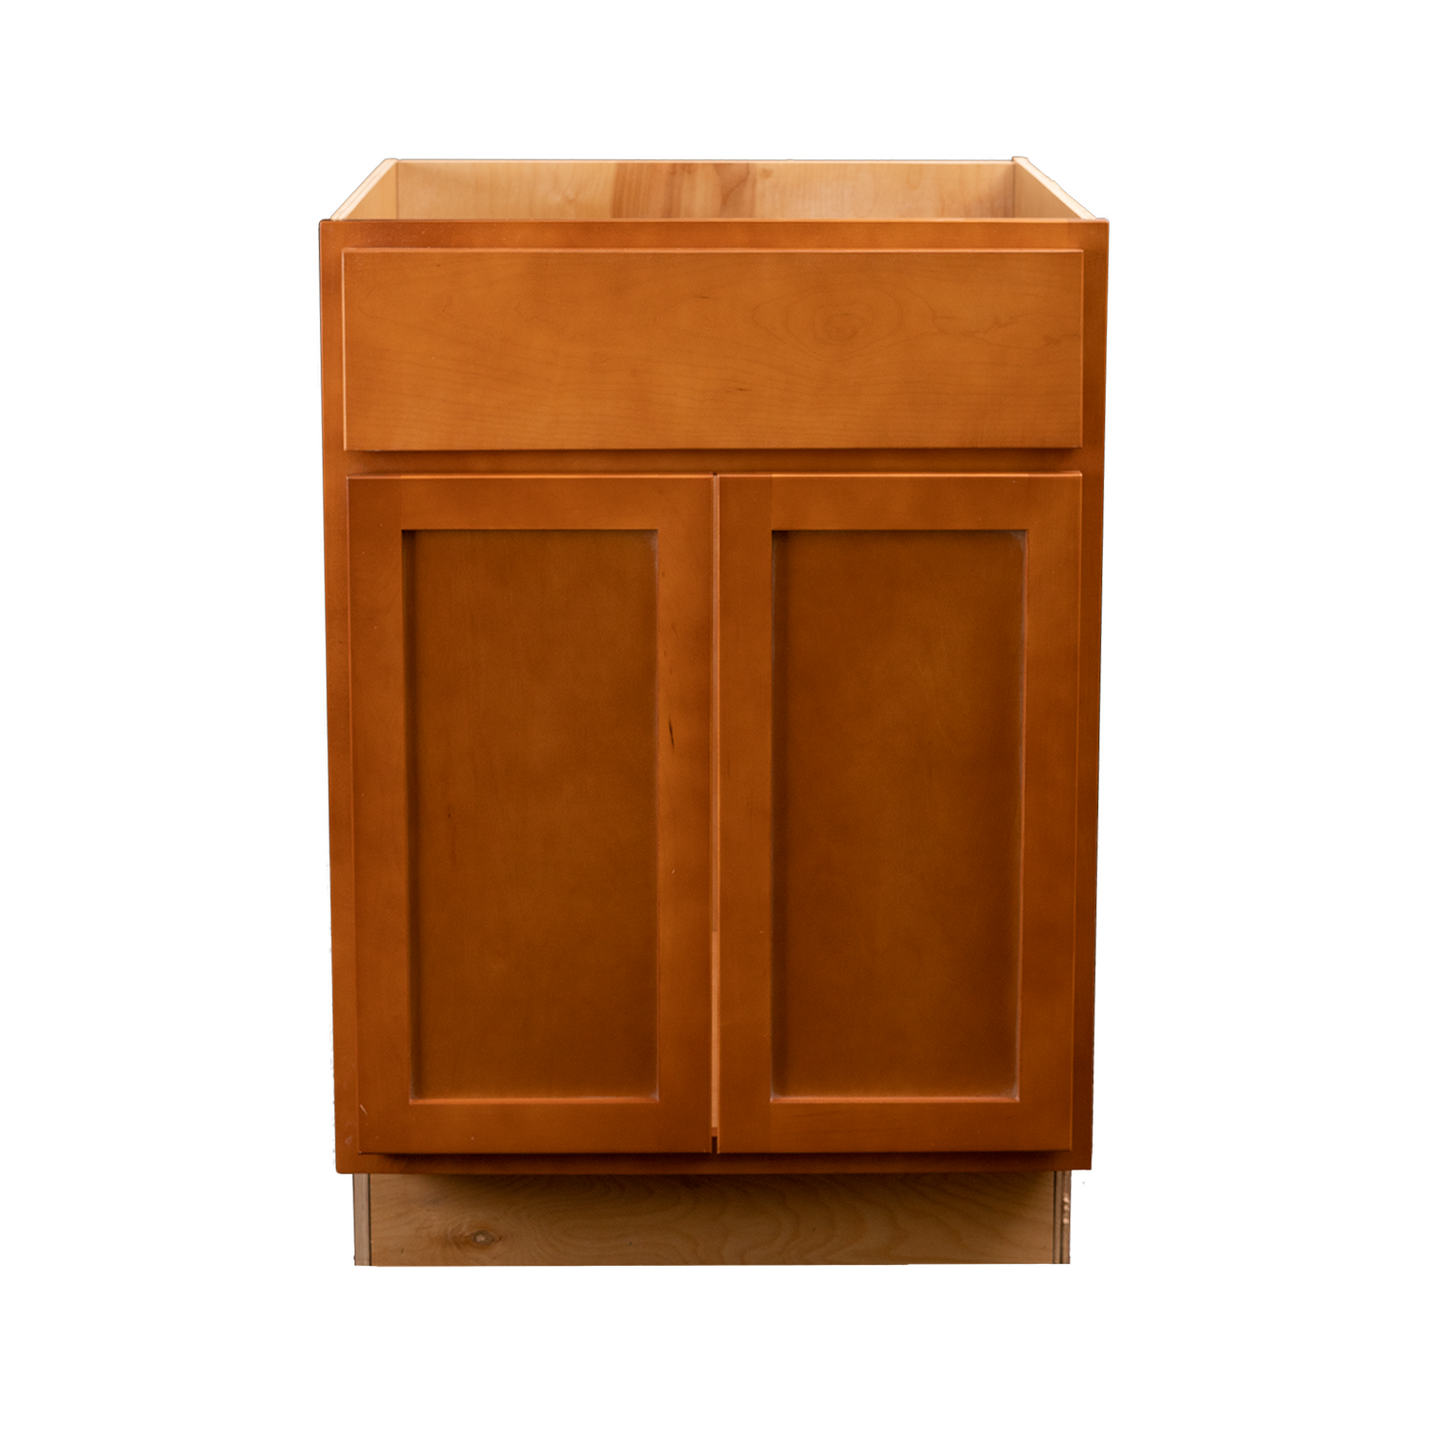 Quicklock RTA (Ready-to-Assemble) Provincial Stain Vanity Base Cabinet- 24"W